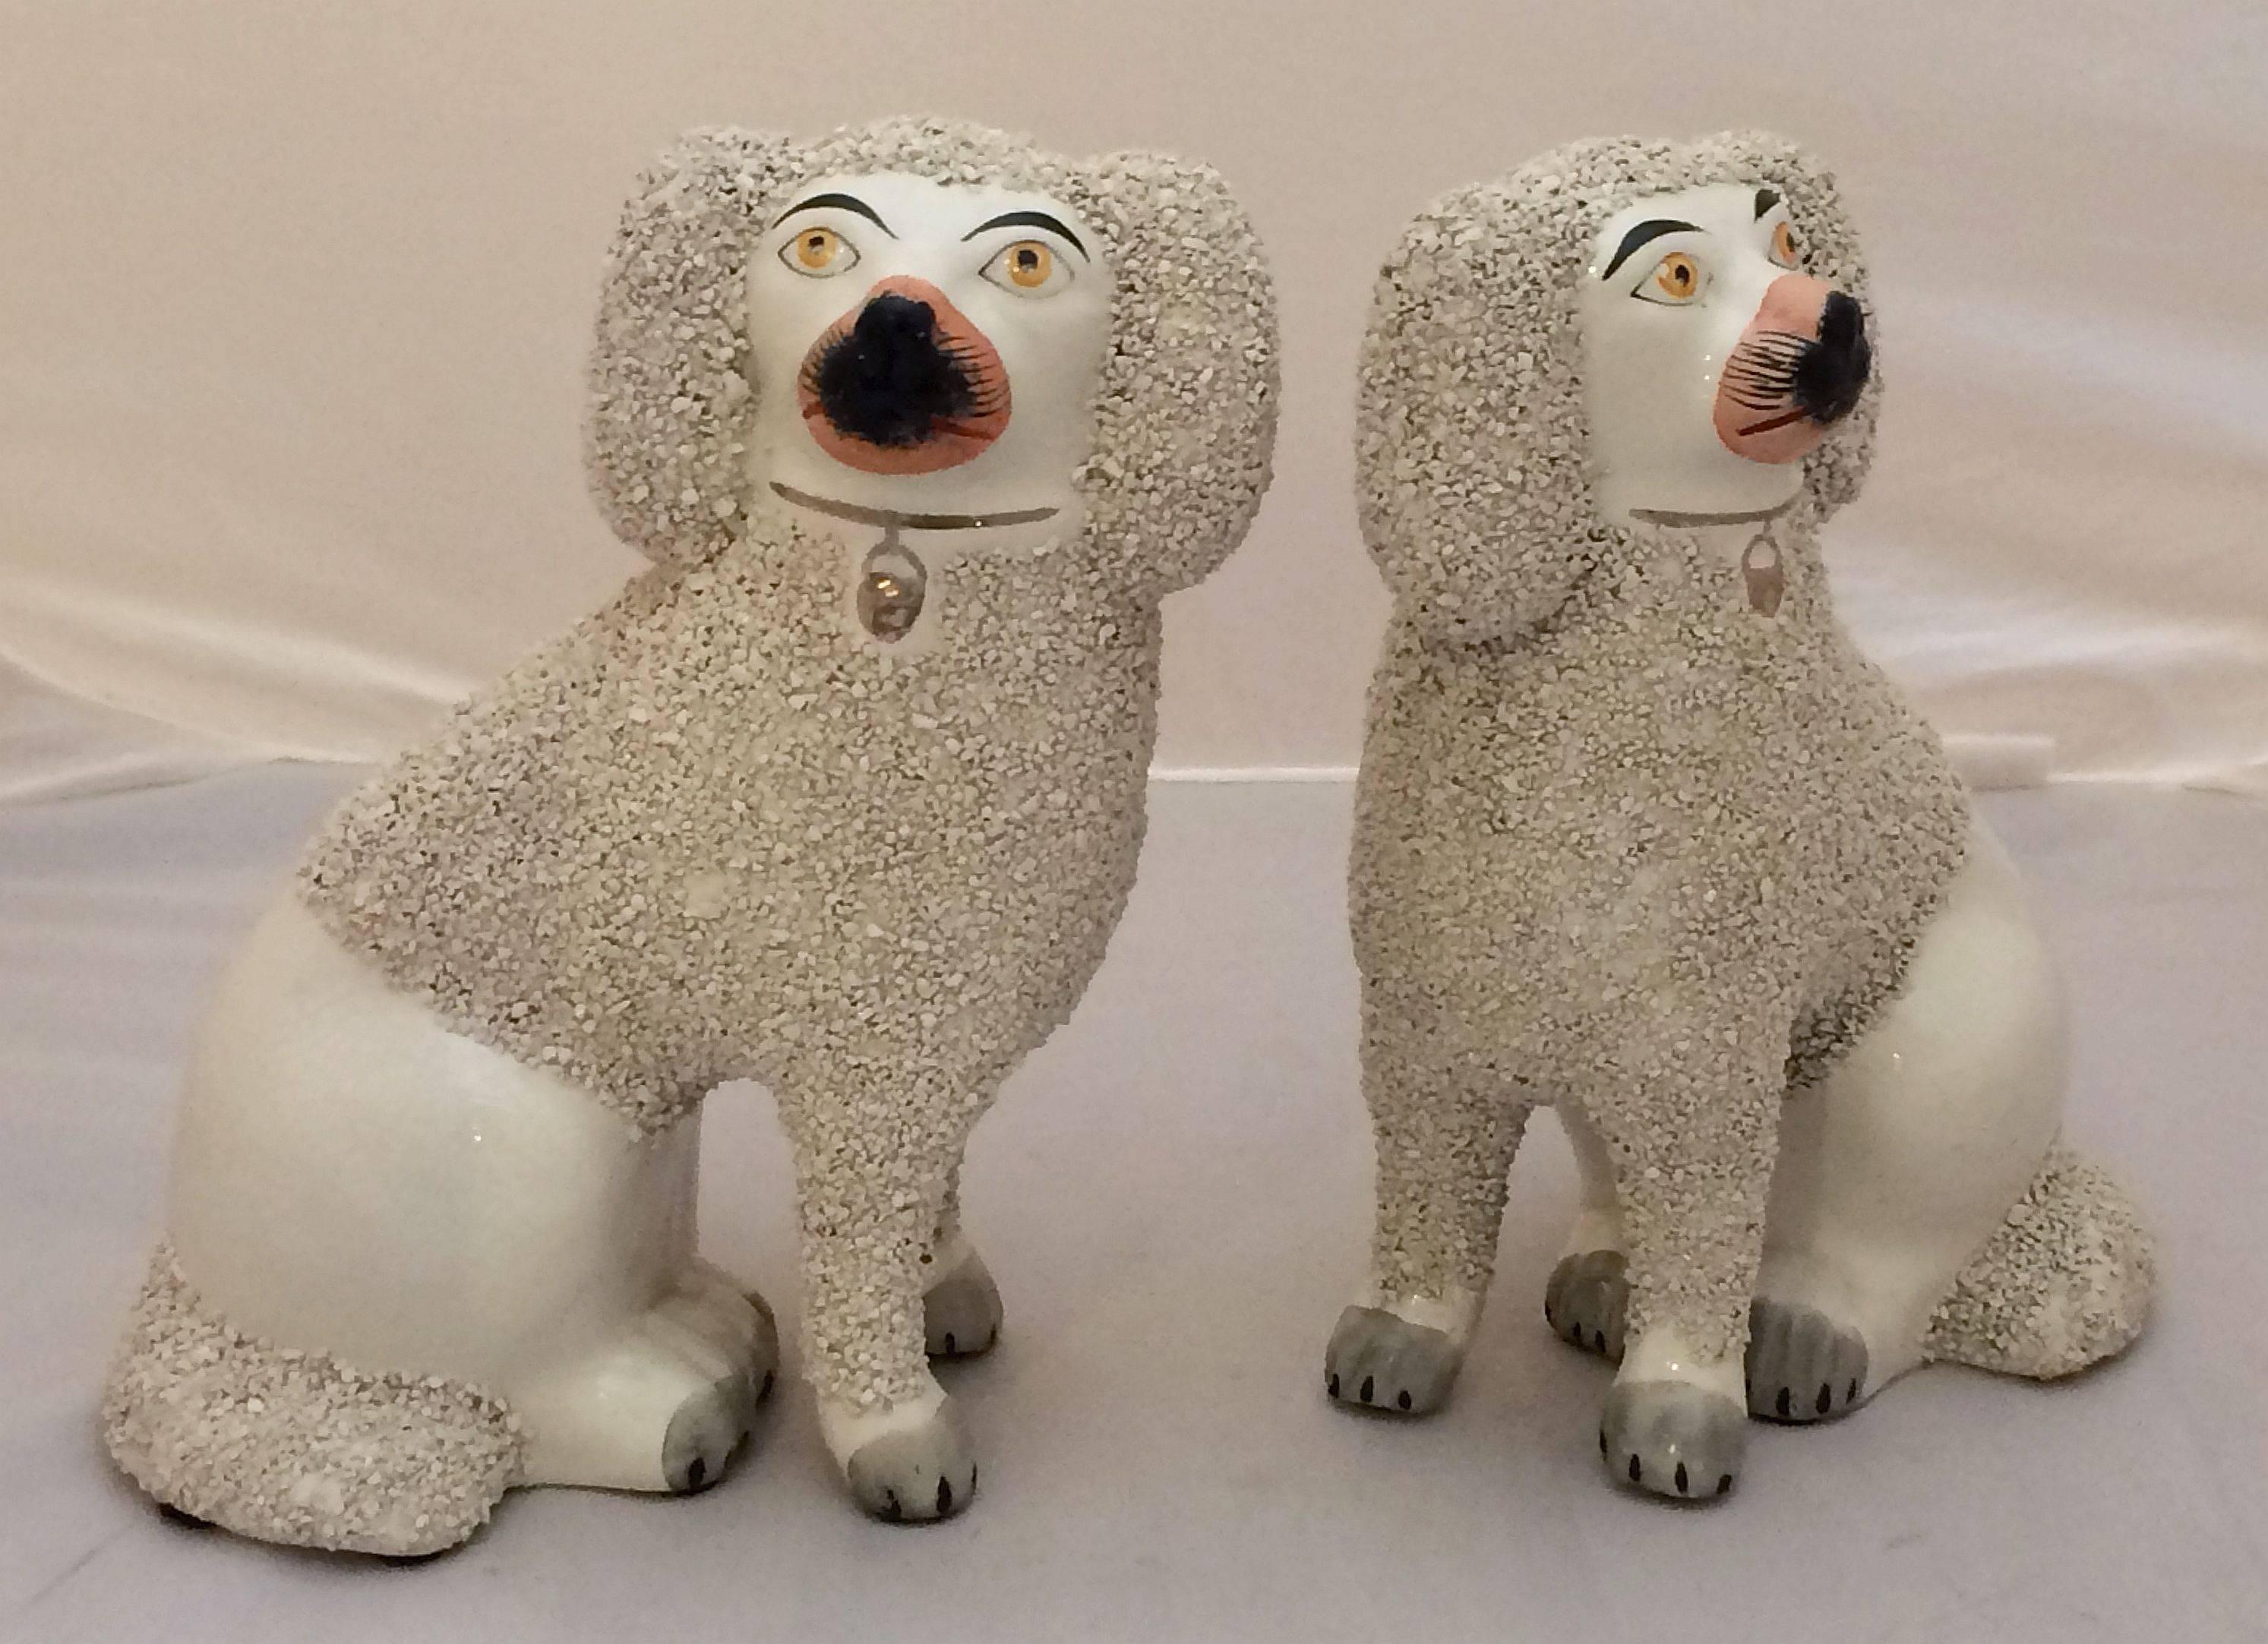 A fine pair of large poodle dogs from the 19th century Staffordshire potteries in England, each poodle featuring separate leg modeling and fine detail painting in the round.

Priced as a pair - $895 the pair.